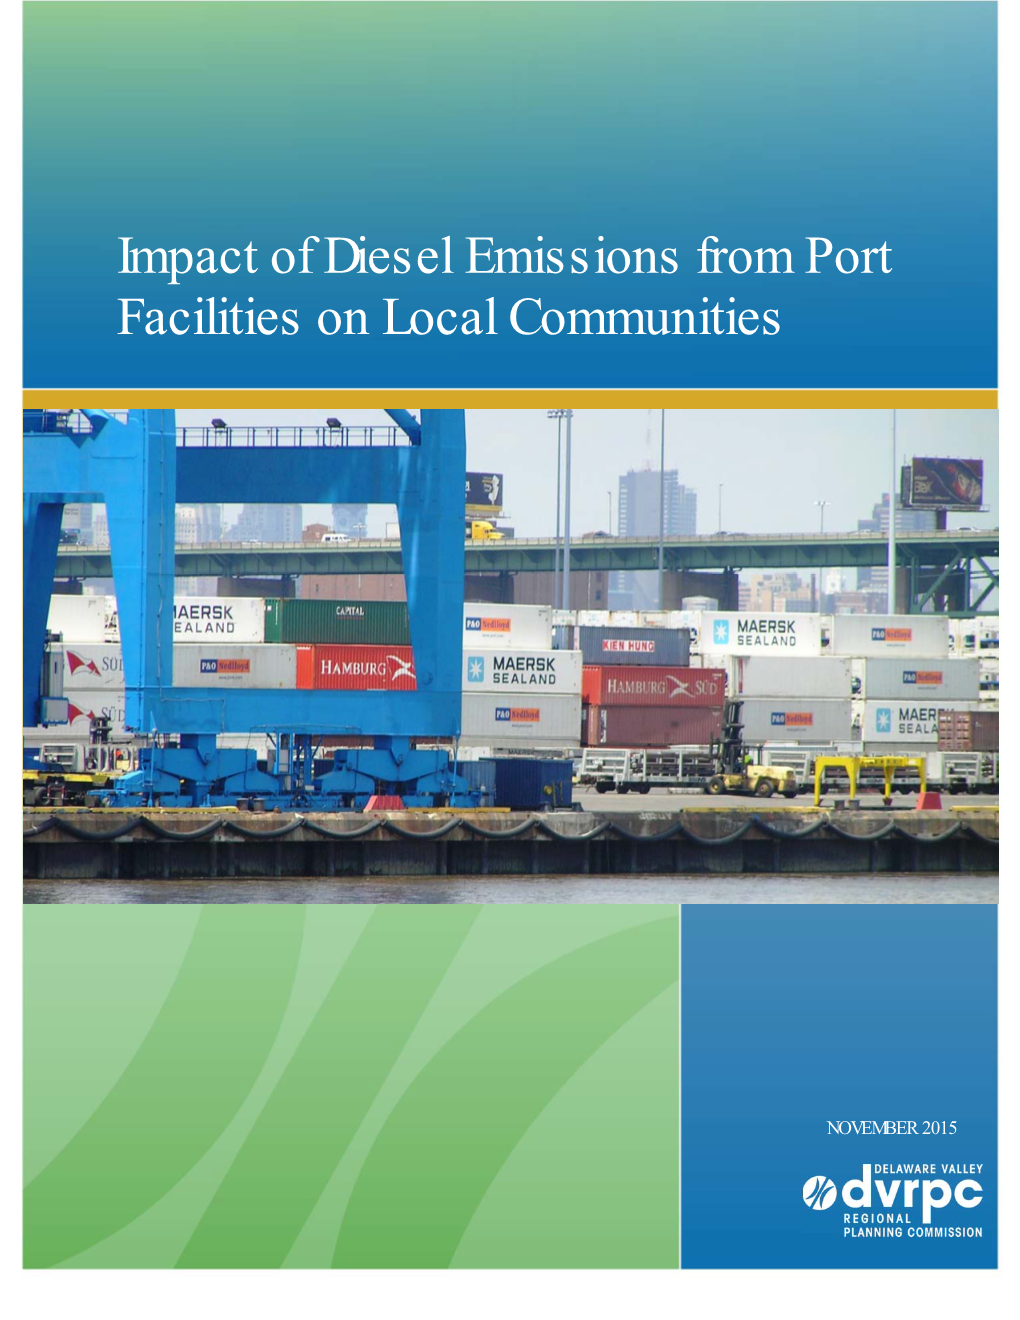 Impact of Diesel Emissions from Port Facilities on Local Communities